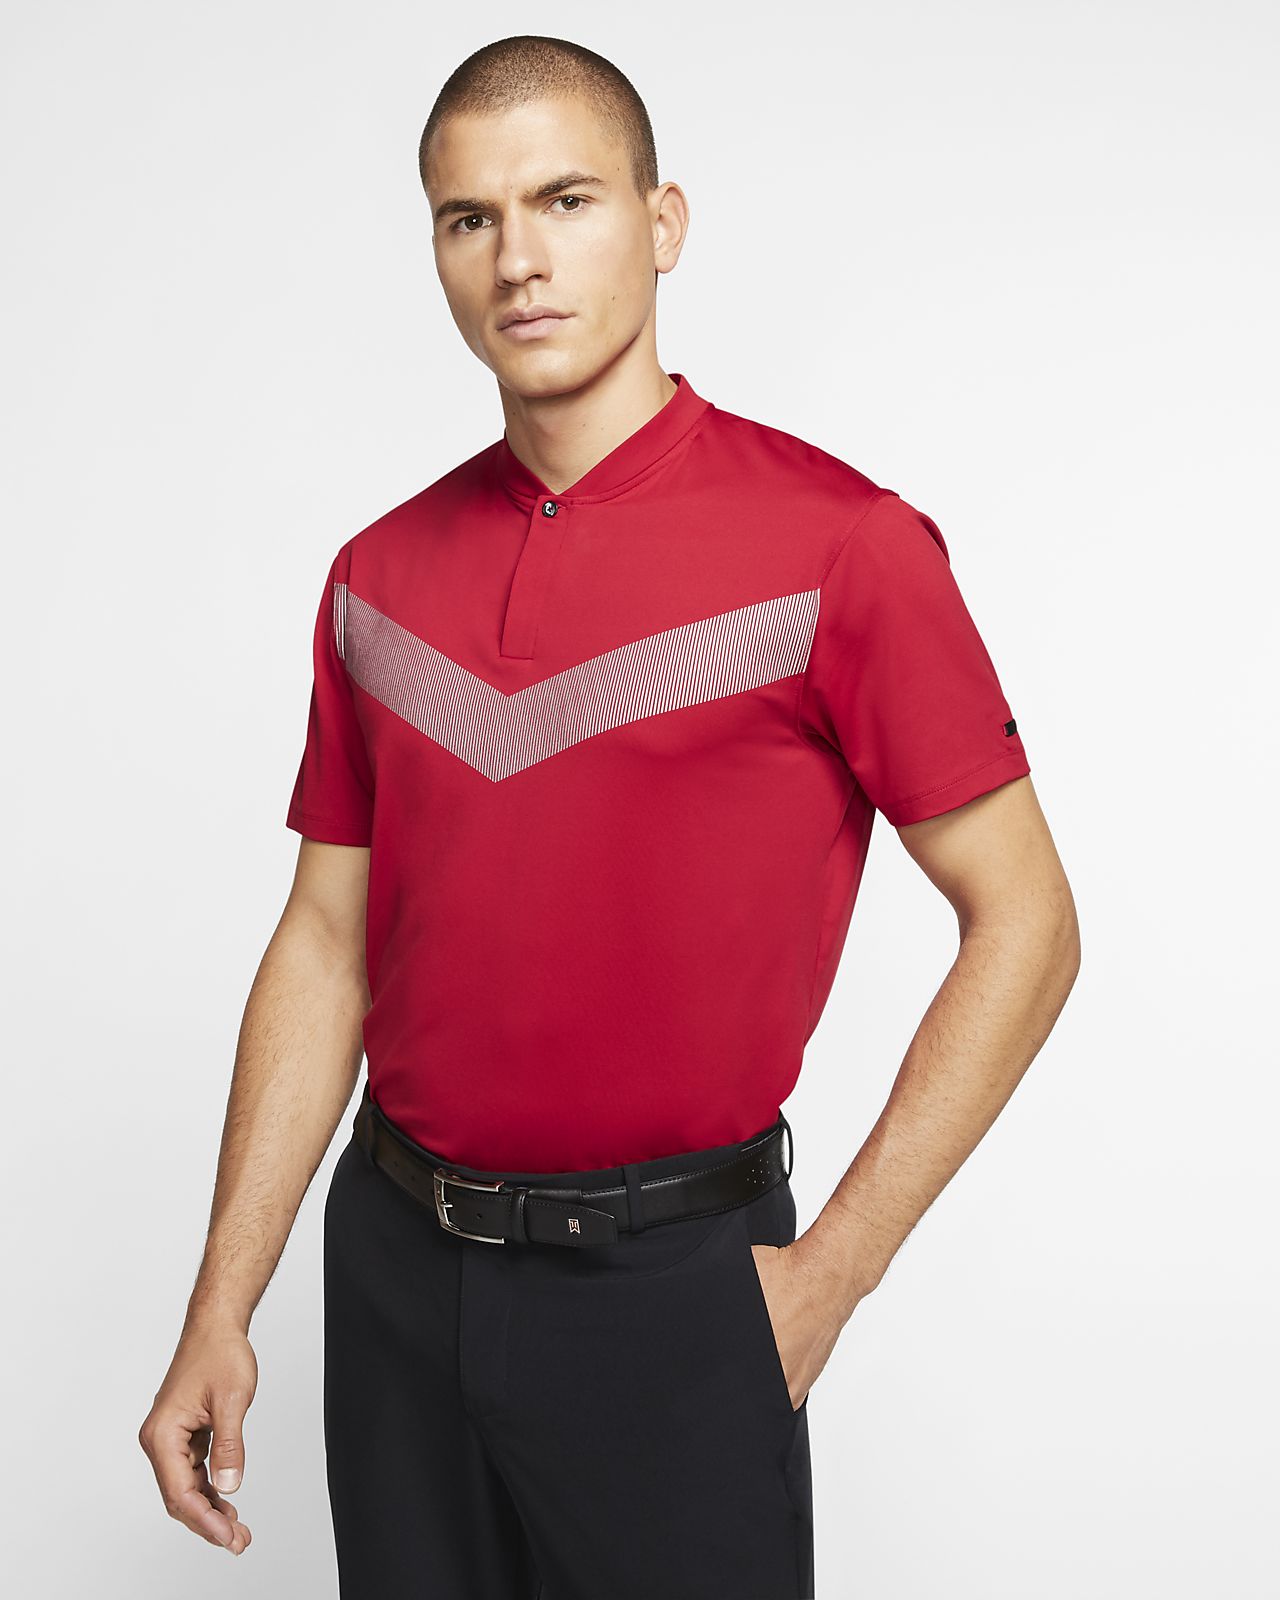 Buy > tiger woods clothing line > in stock